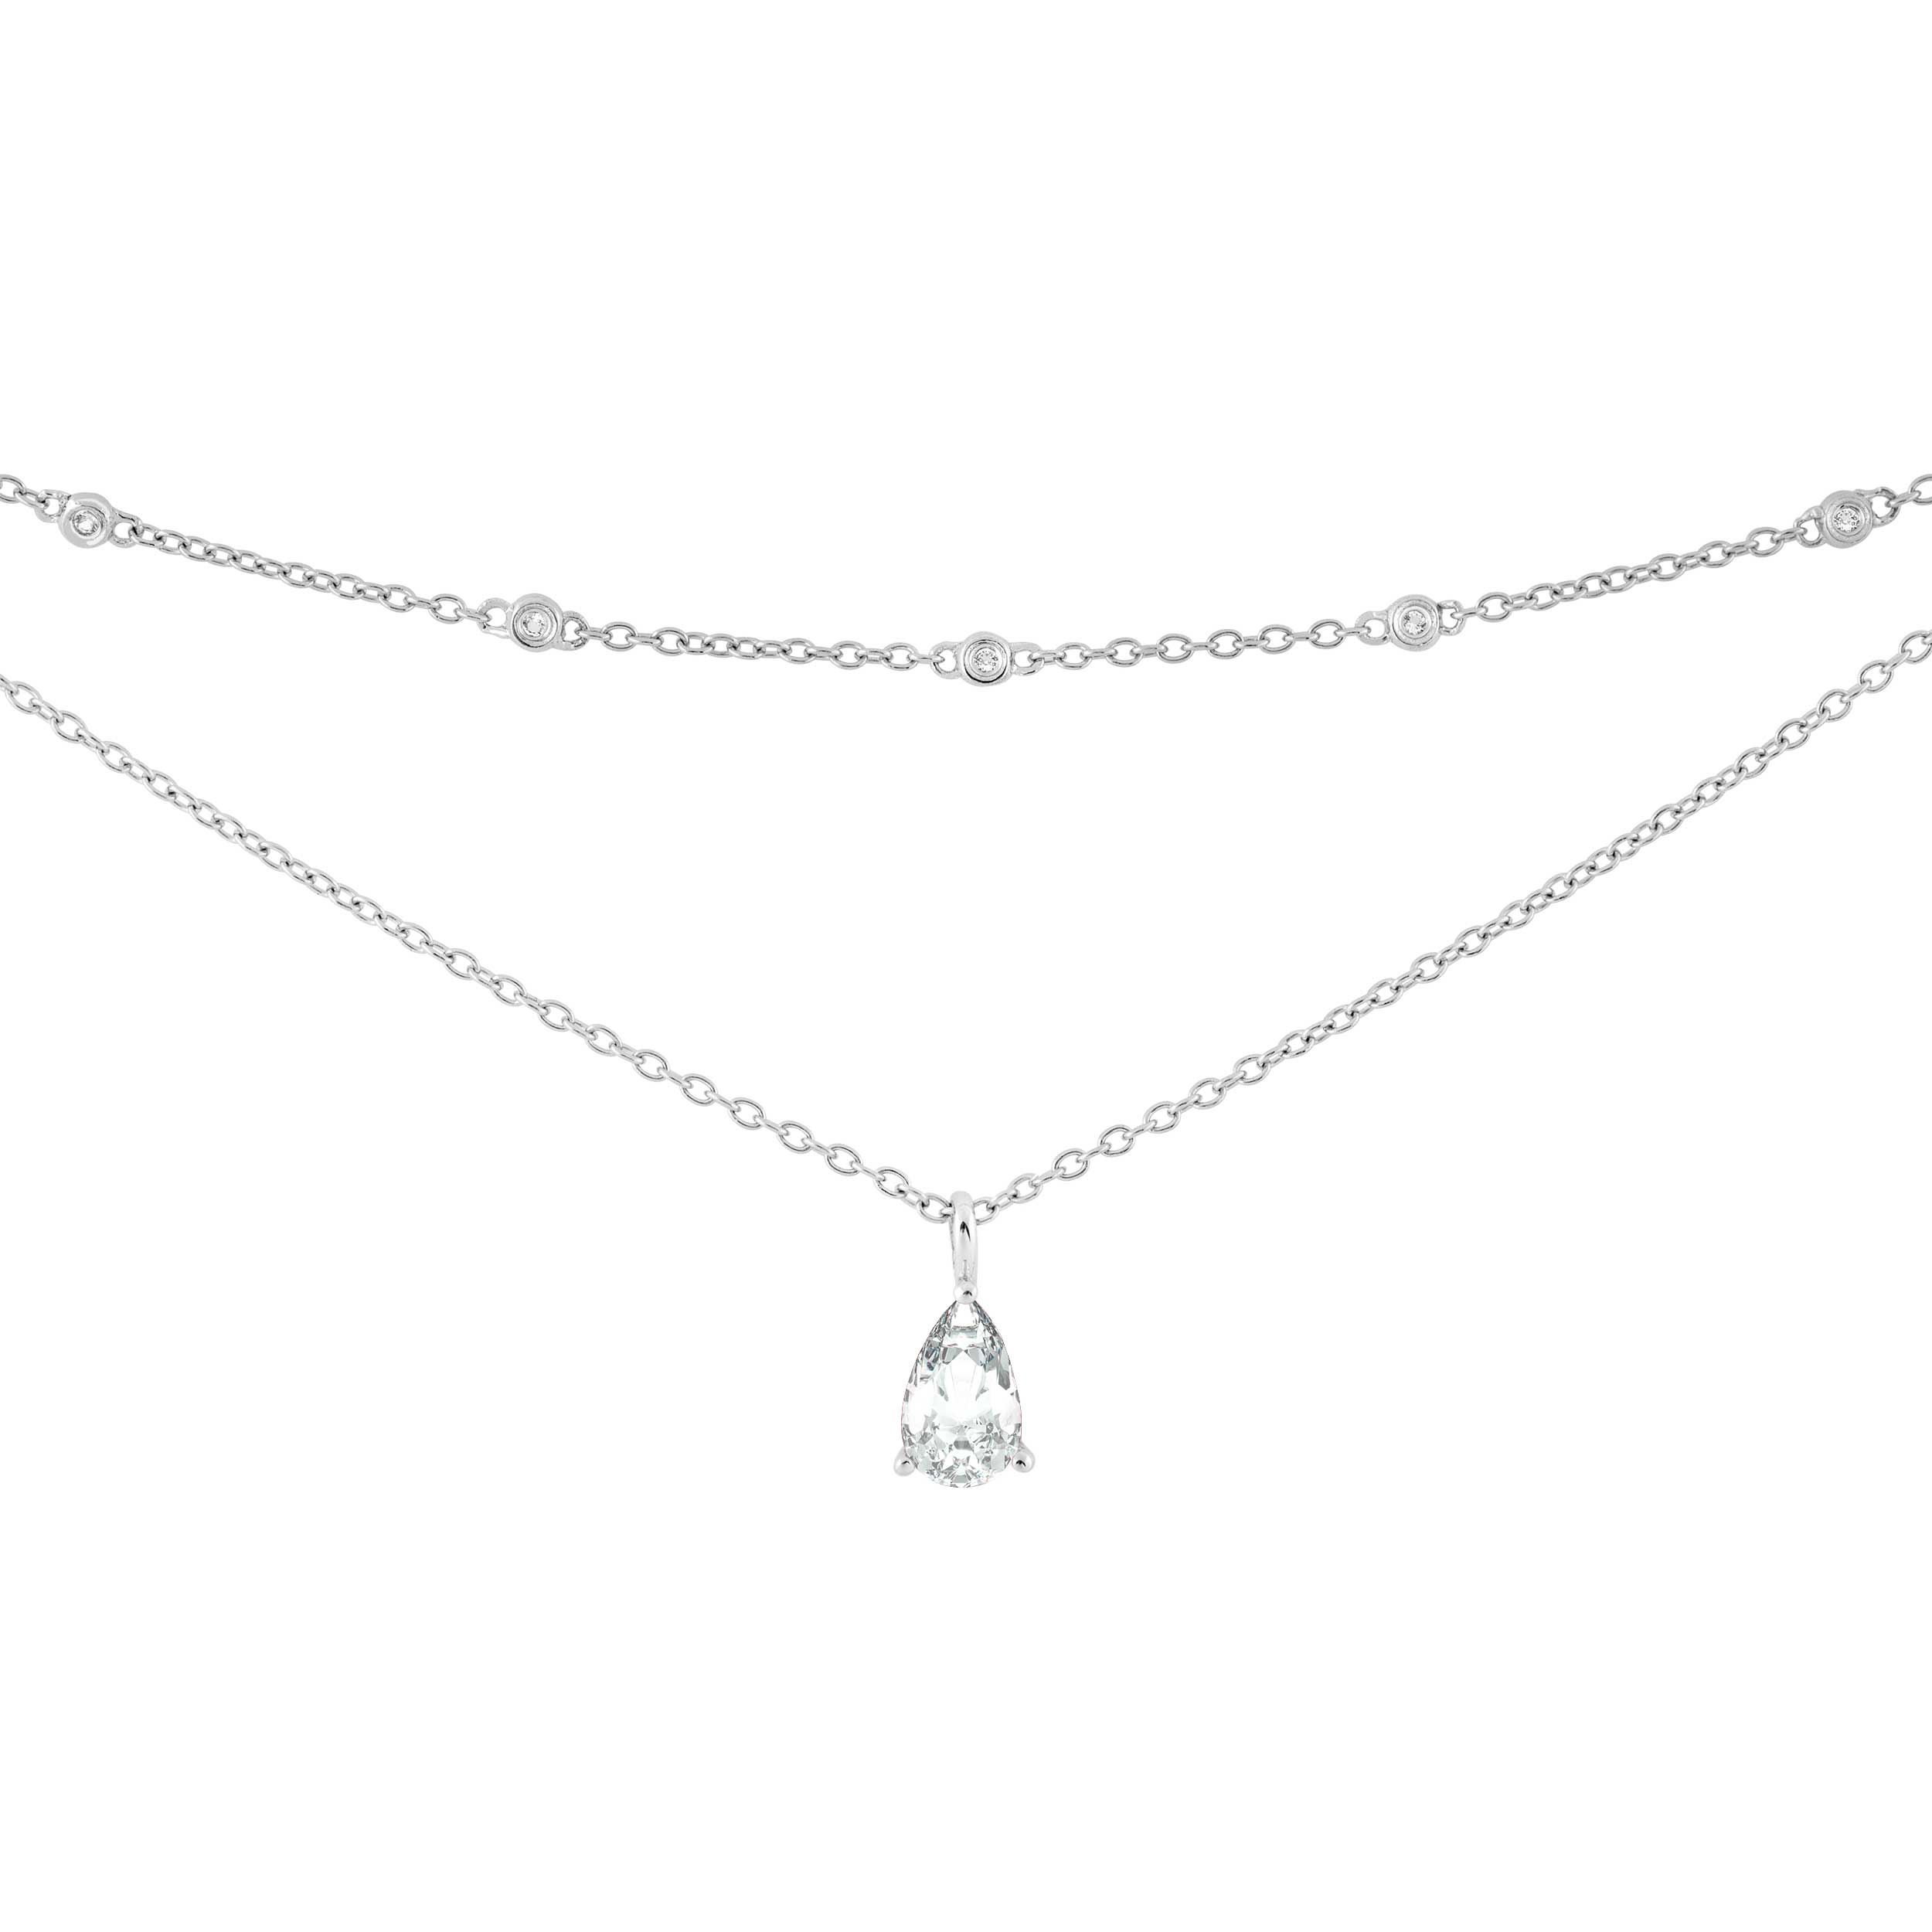  White Topaz Pendant Necklace, Rhodium Plated Sterling Silver